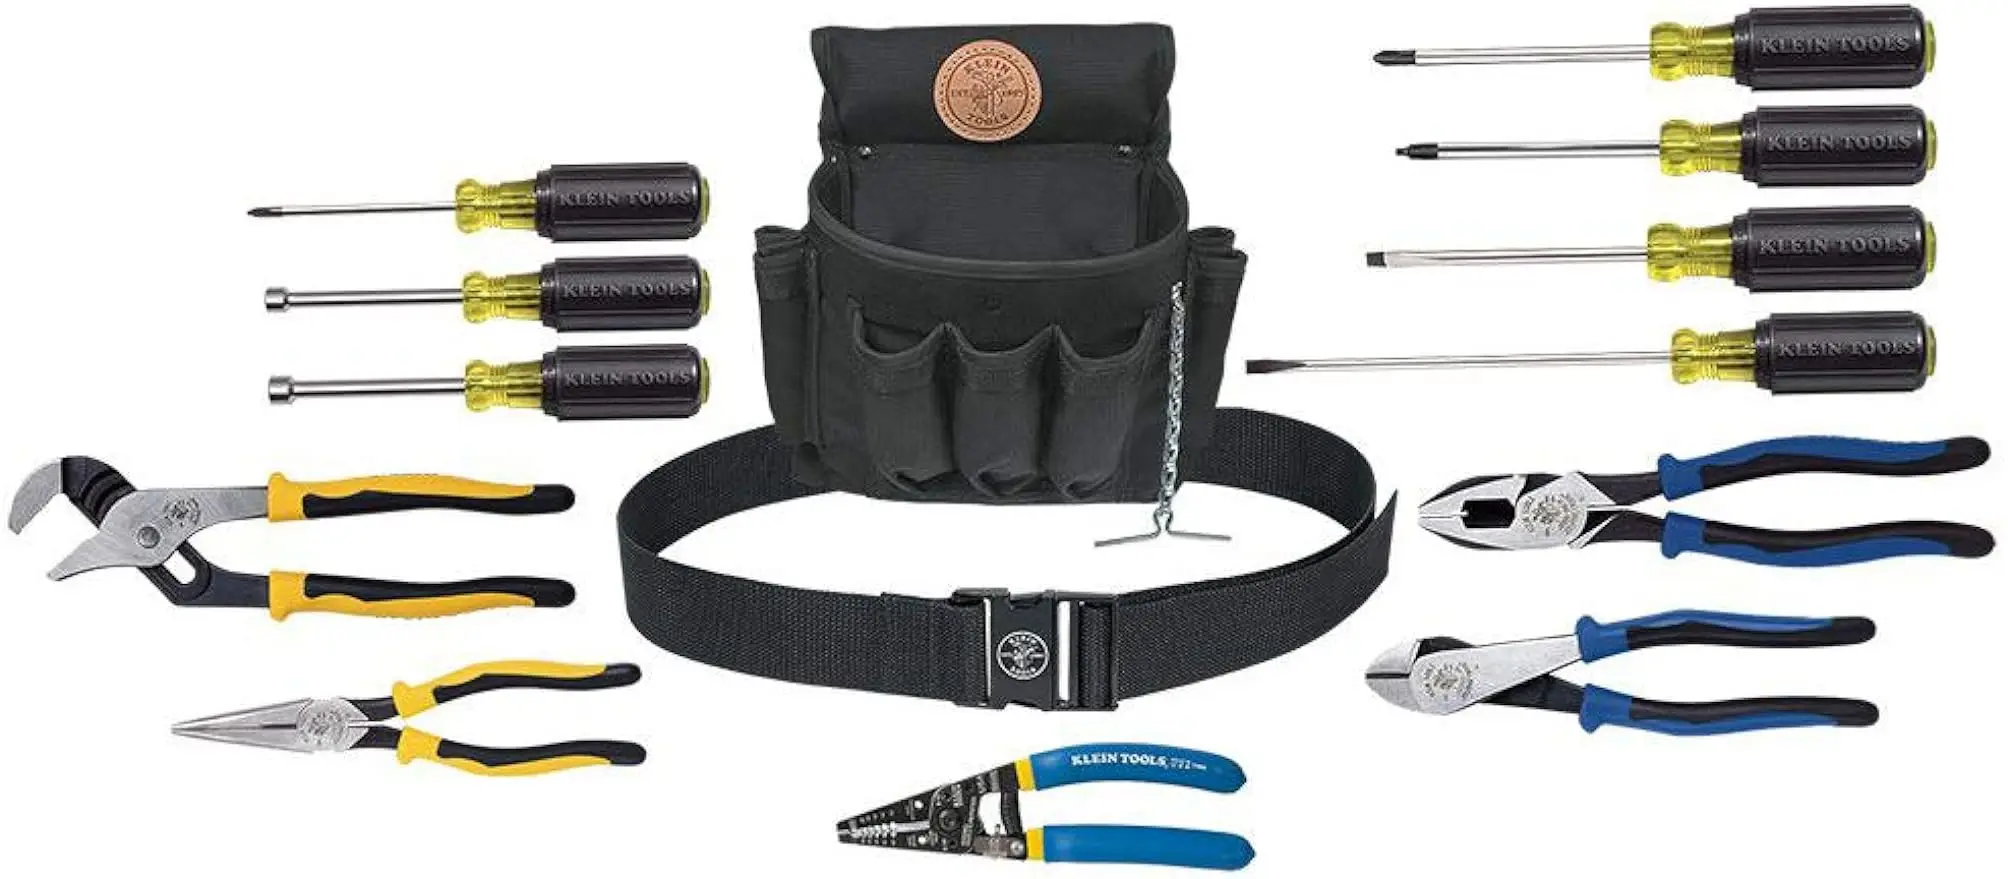 Klein Tools 92914 Tool Kit, Tool Set Includes Basic Tools, Pouch and Belt for Journeyman, Linesman, Professionals